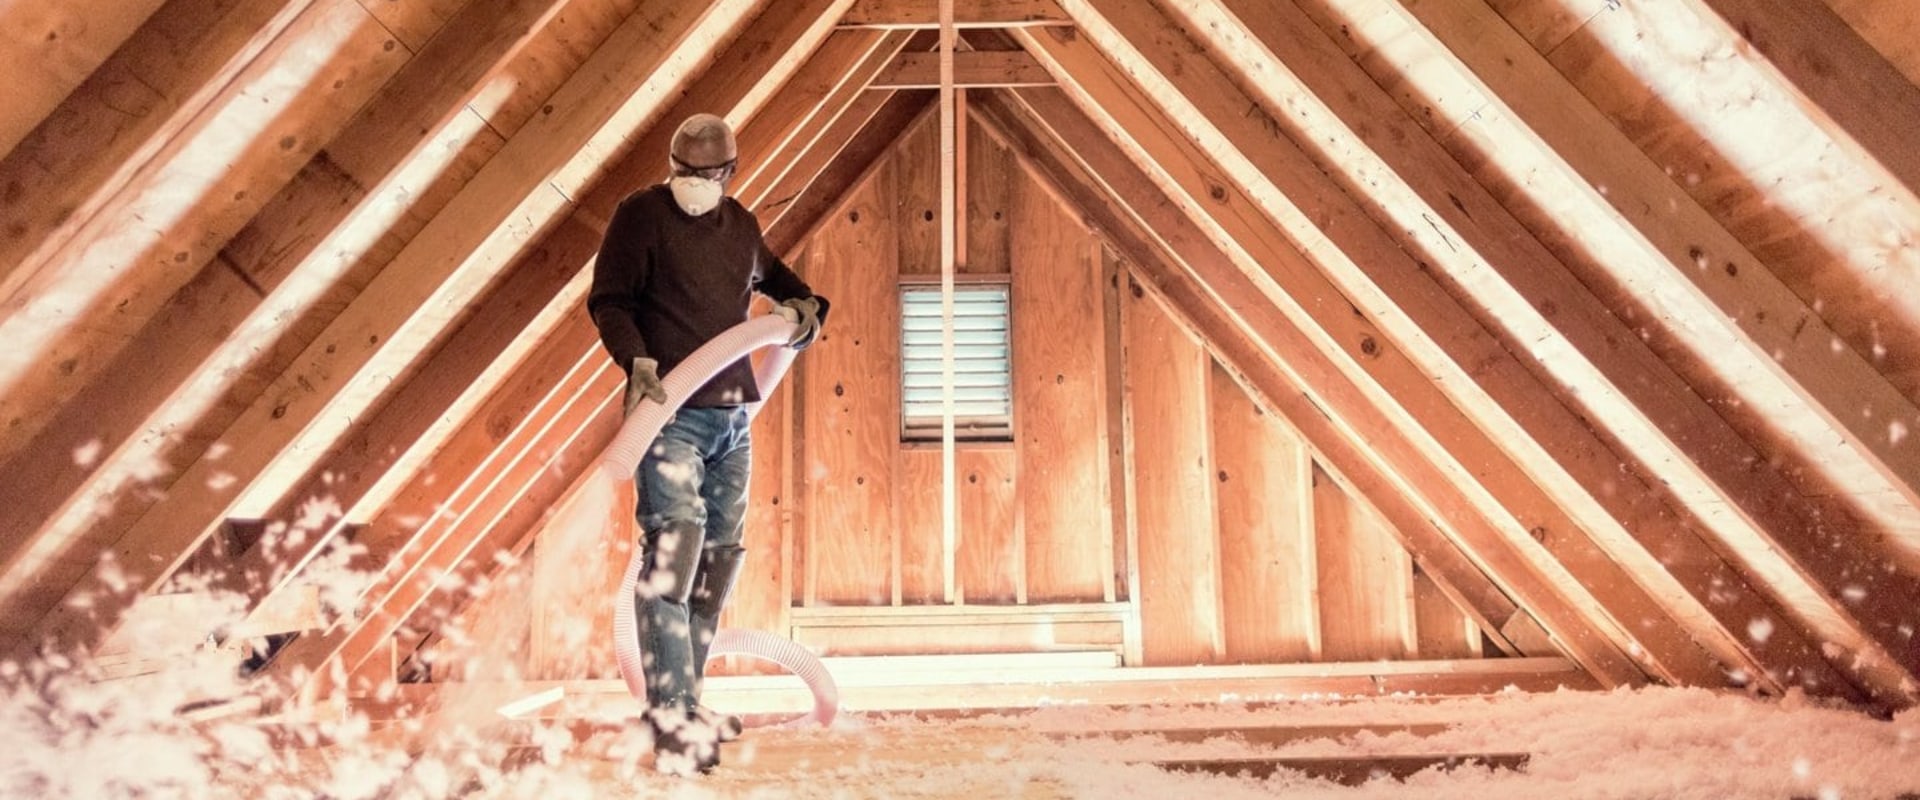 Attic Insulation Installation in West Palm Beach, FL: What Type of Warranty is Offered?